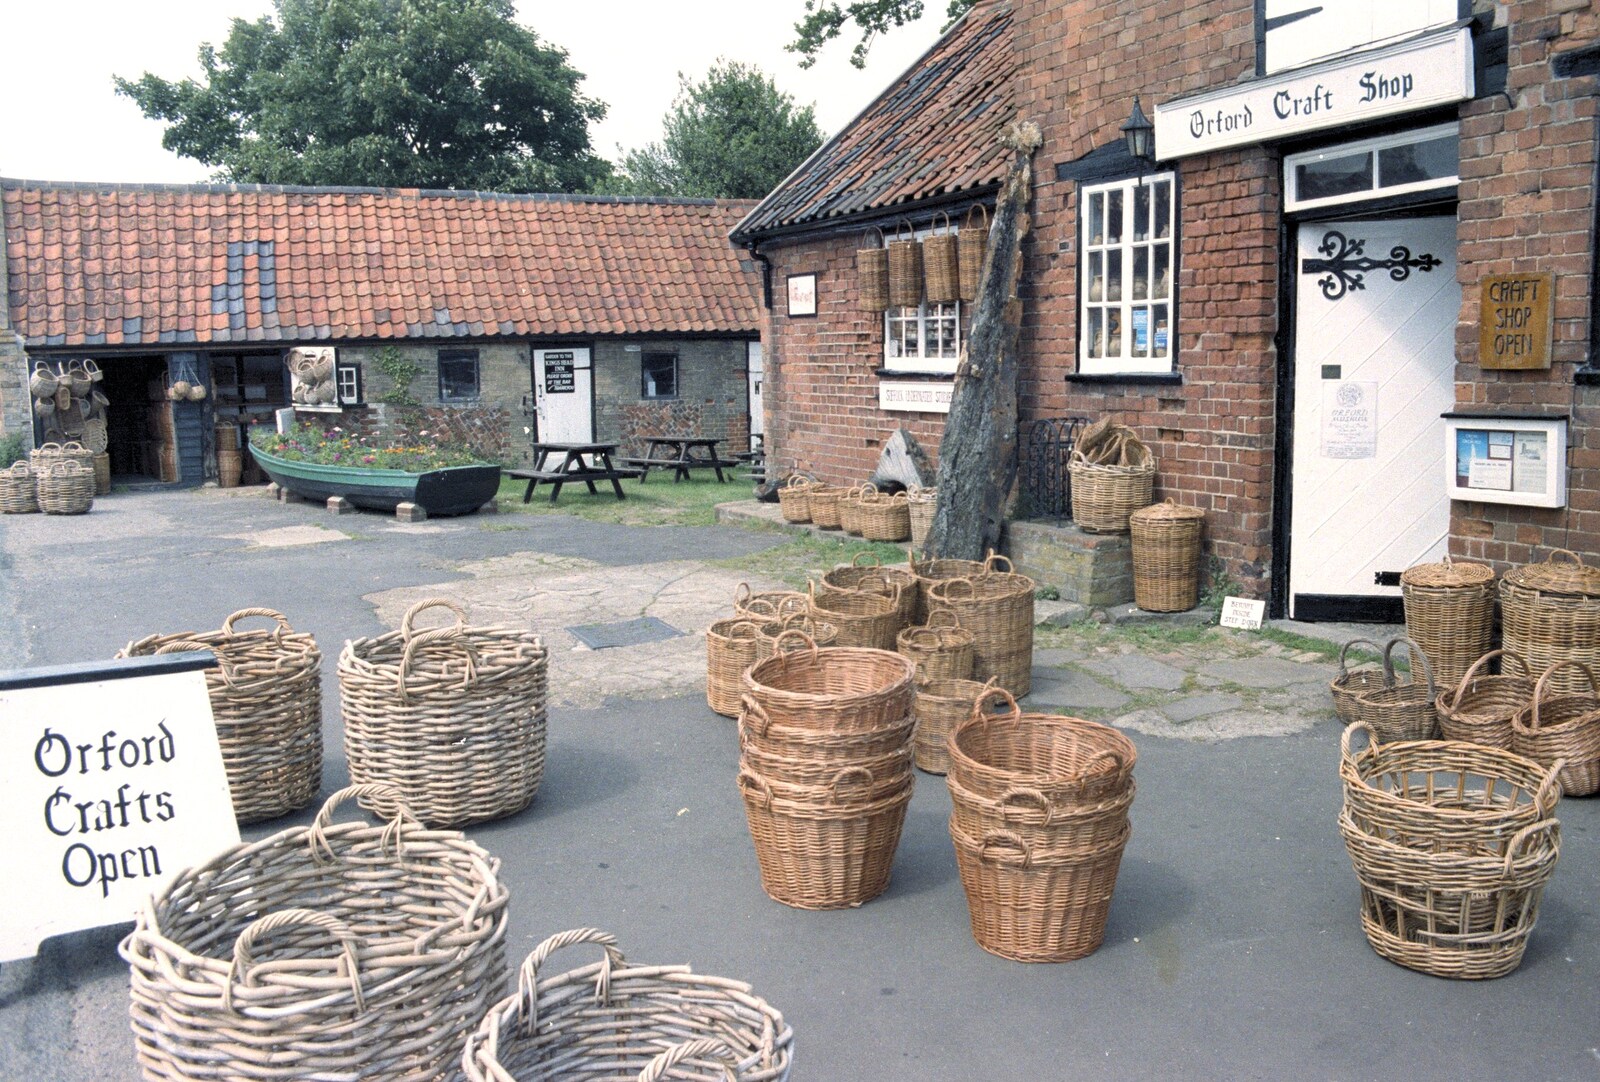 Baskets outside the Orford Craft Shop from Orford With Riki and Dave, Poppies and an Alfie Afternoon, Suffolk - 6th August 1994